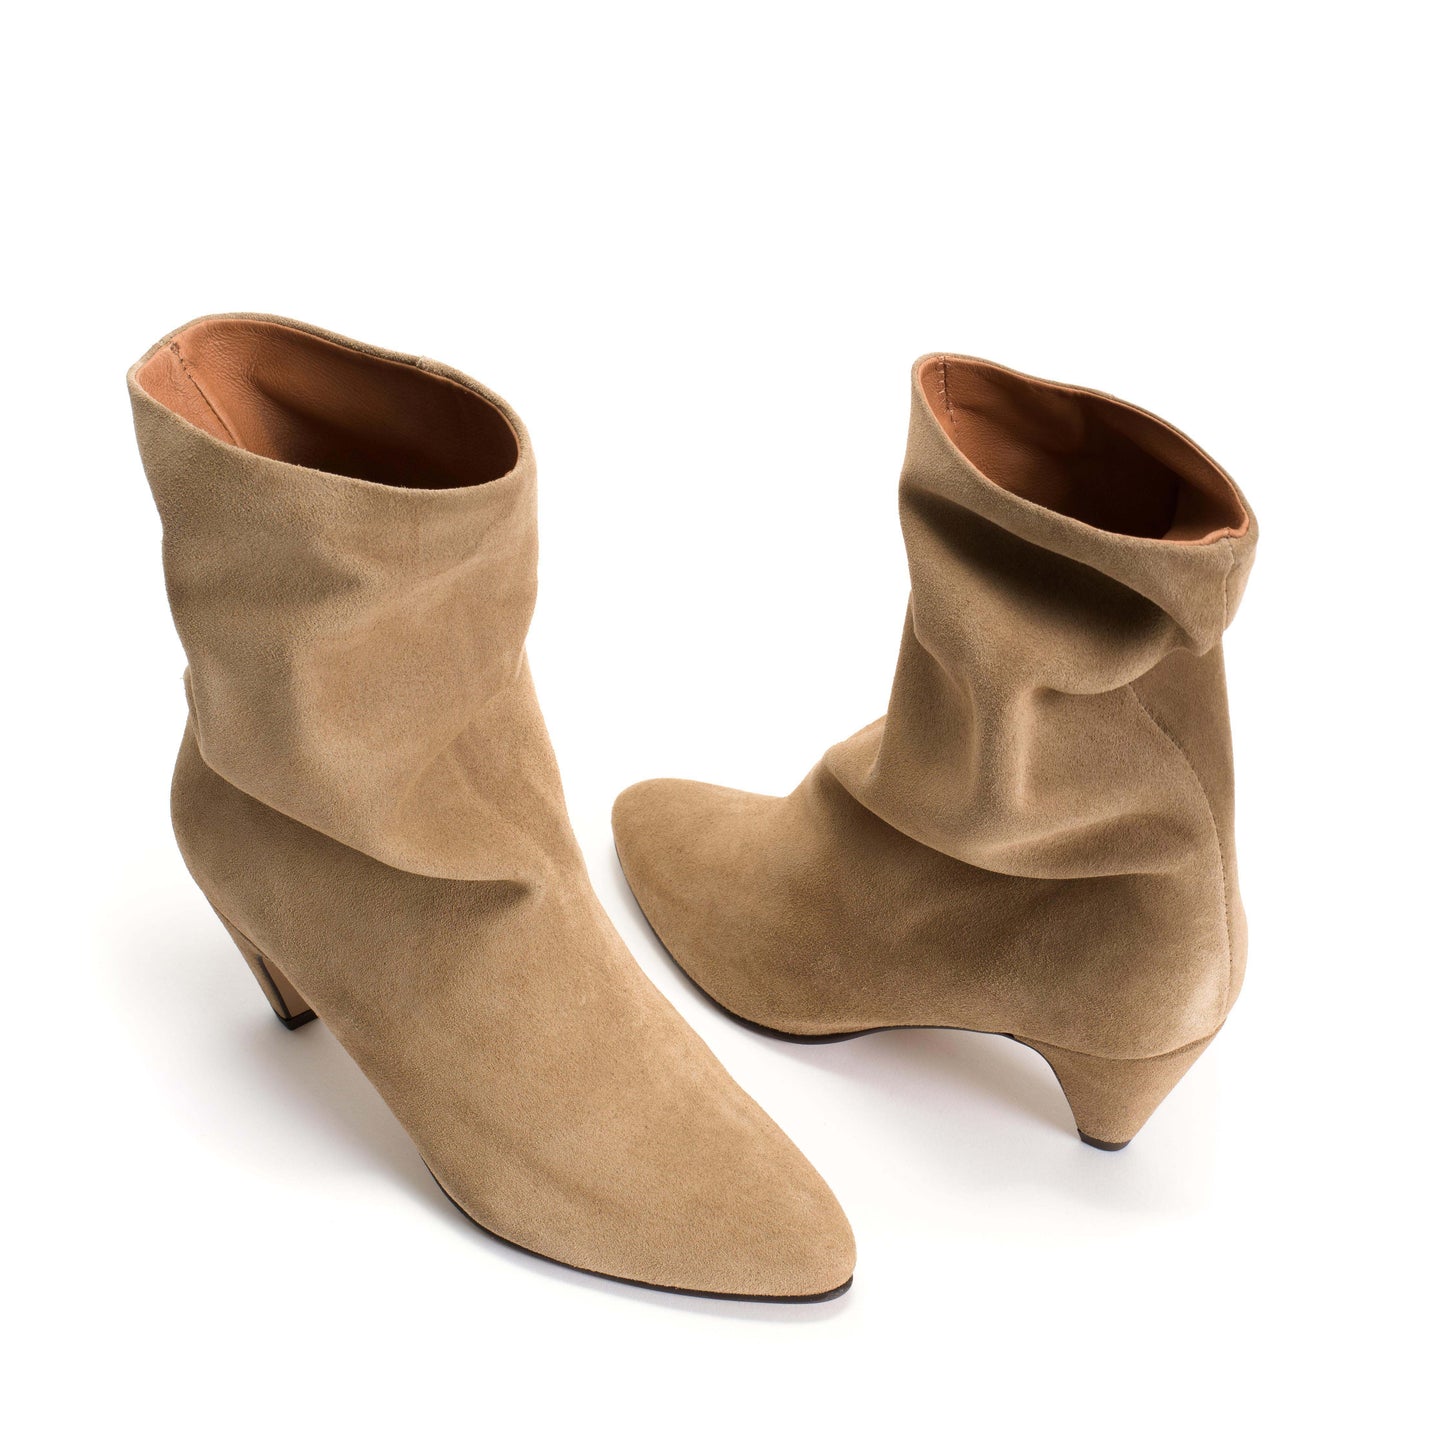 Boots Vully 50 stiletto Calf suede